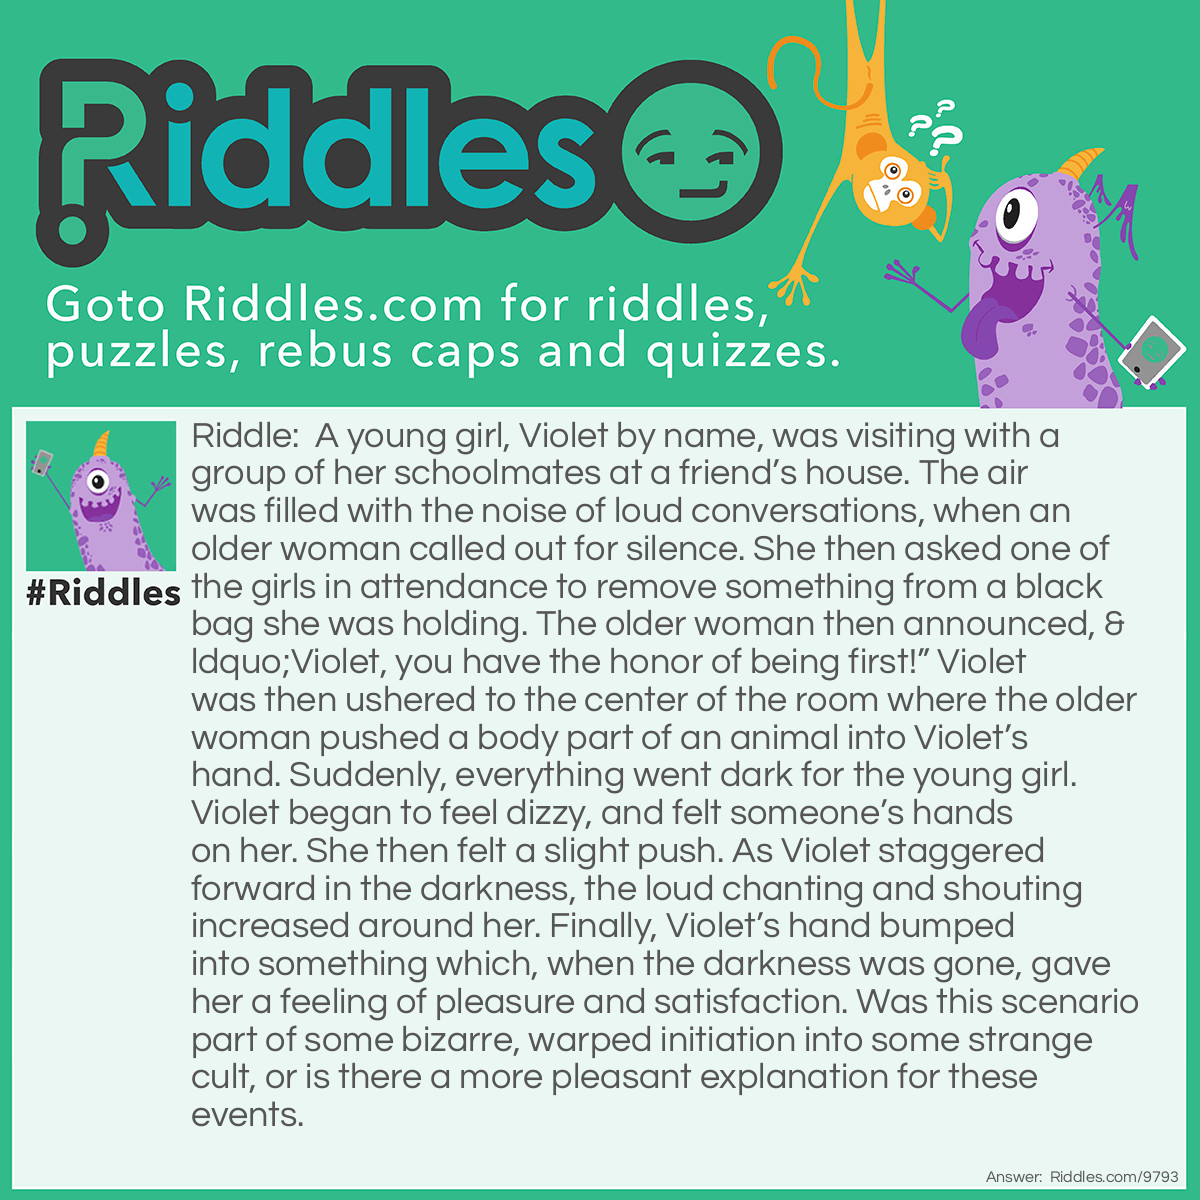 Riddle: A young girl, Violet by name, was visiting with a group of her schoolmates at a friend's house. The air was filled with the noise of loud conversations, when an older woman called out for silence. She then asked one of the girls in attendance to remove something from a black bag she was holding. The older woman then announced, "Violet, you have the honor of being first!" Violet was then ushered to the center of the room where the older woman pushed a body part of an animal into Violet's hand. Suddenly, everything went dark for the young girl. Violet began to feel dizzy, and felt someone's hands on her. She then felt a slight push. As Violet staggered forward in the darkness, the loud chanting and shouting increased around her. Finally, Violet's hand bumped into something which, when the darkness was gone, gave her a feeling of pleasure and satisfaction. Was this scenario part of some bizarre, warped initiation into some strange cult, or is there a more pleasant explanation for these events. Answer: Violet was at a birthday party, and was selected to be first in the Pin the Tail on the Donkey game they were playing. She was successful in pinning the tail just where it belonged. The body part of the animal was, of course, the donkey’s tail.